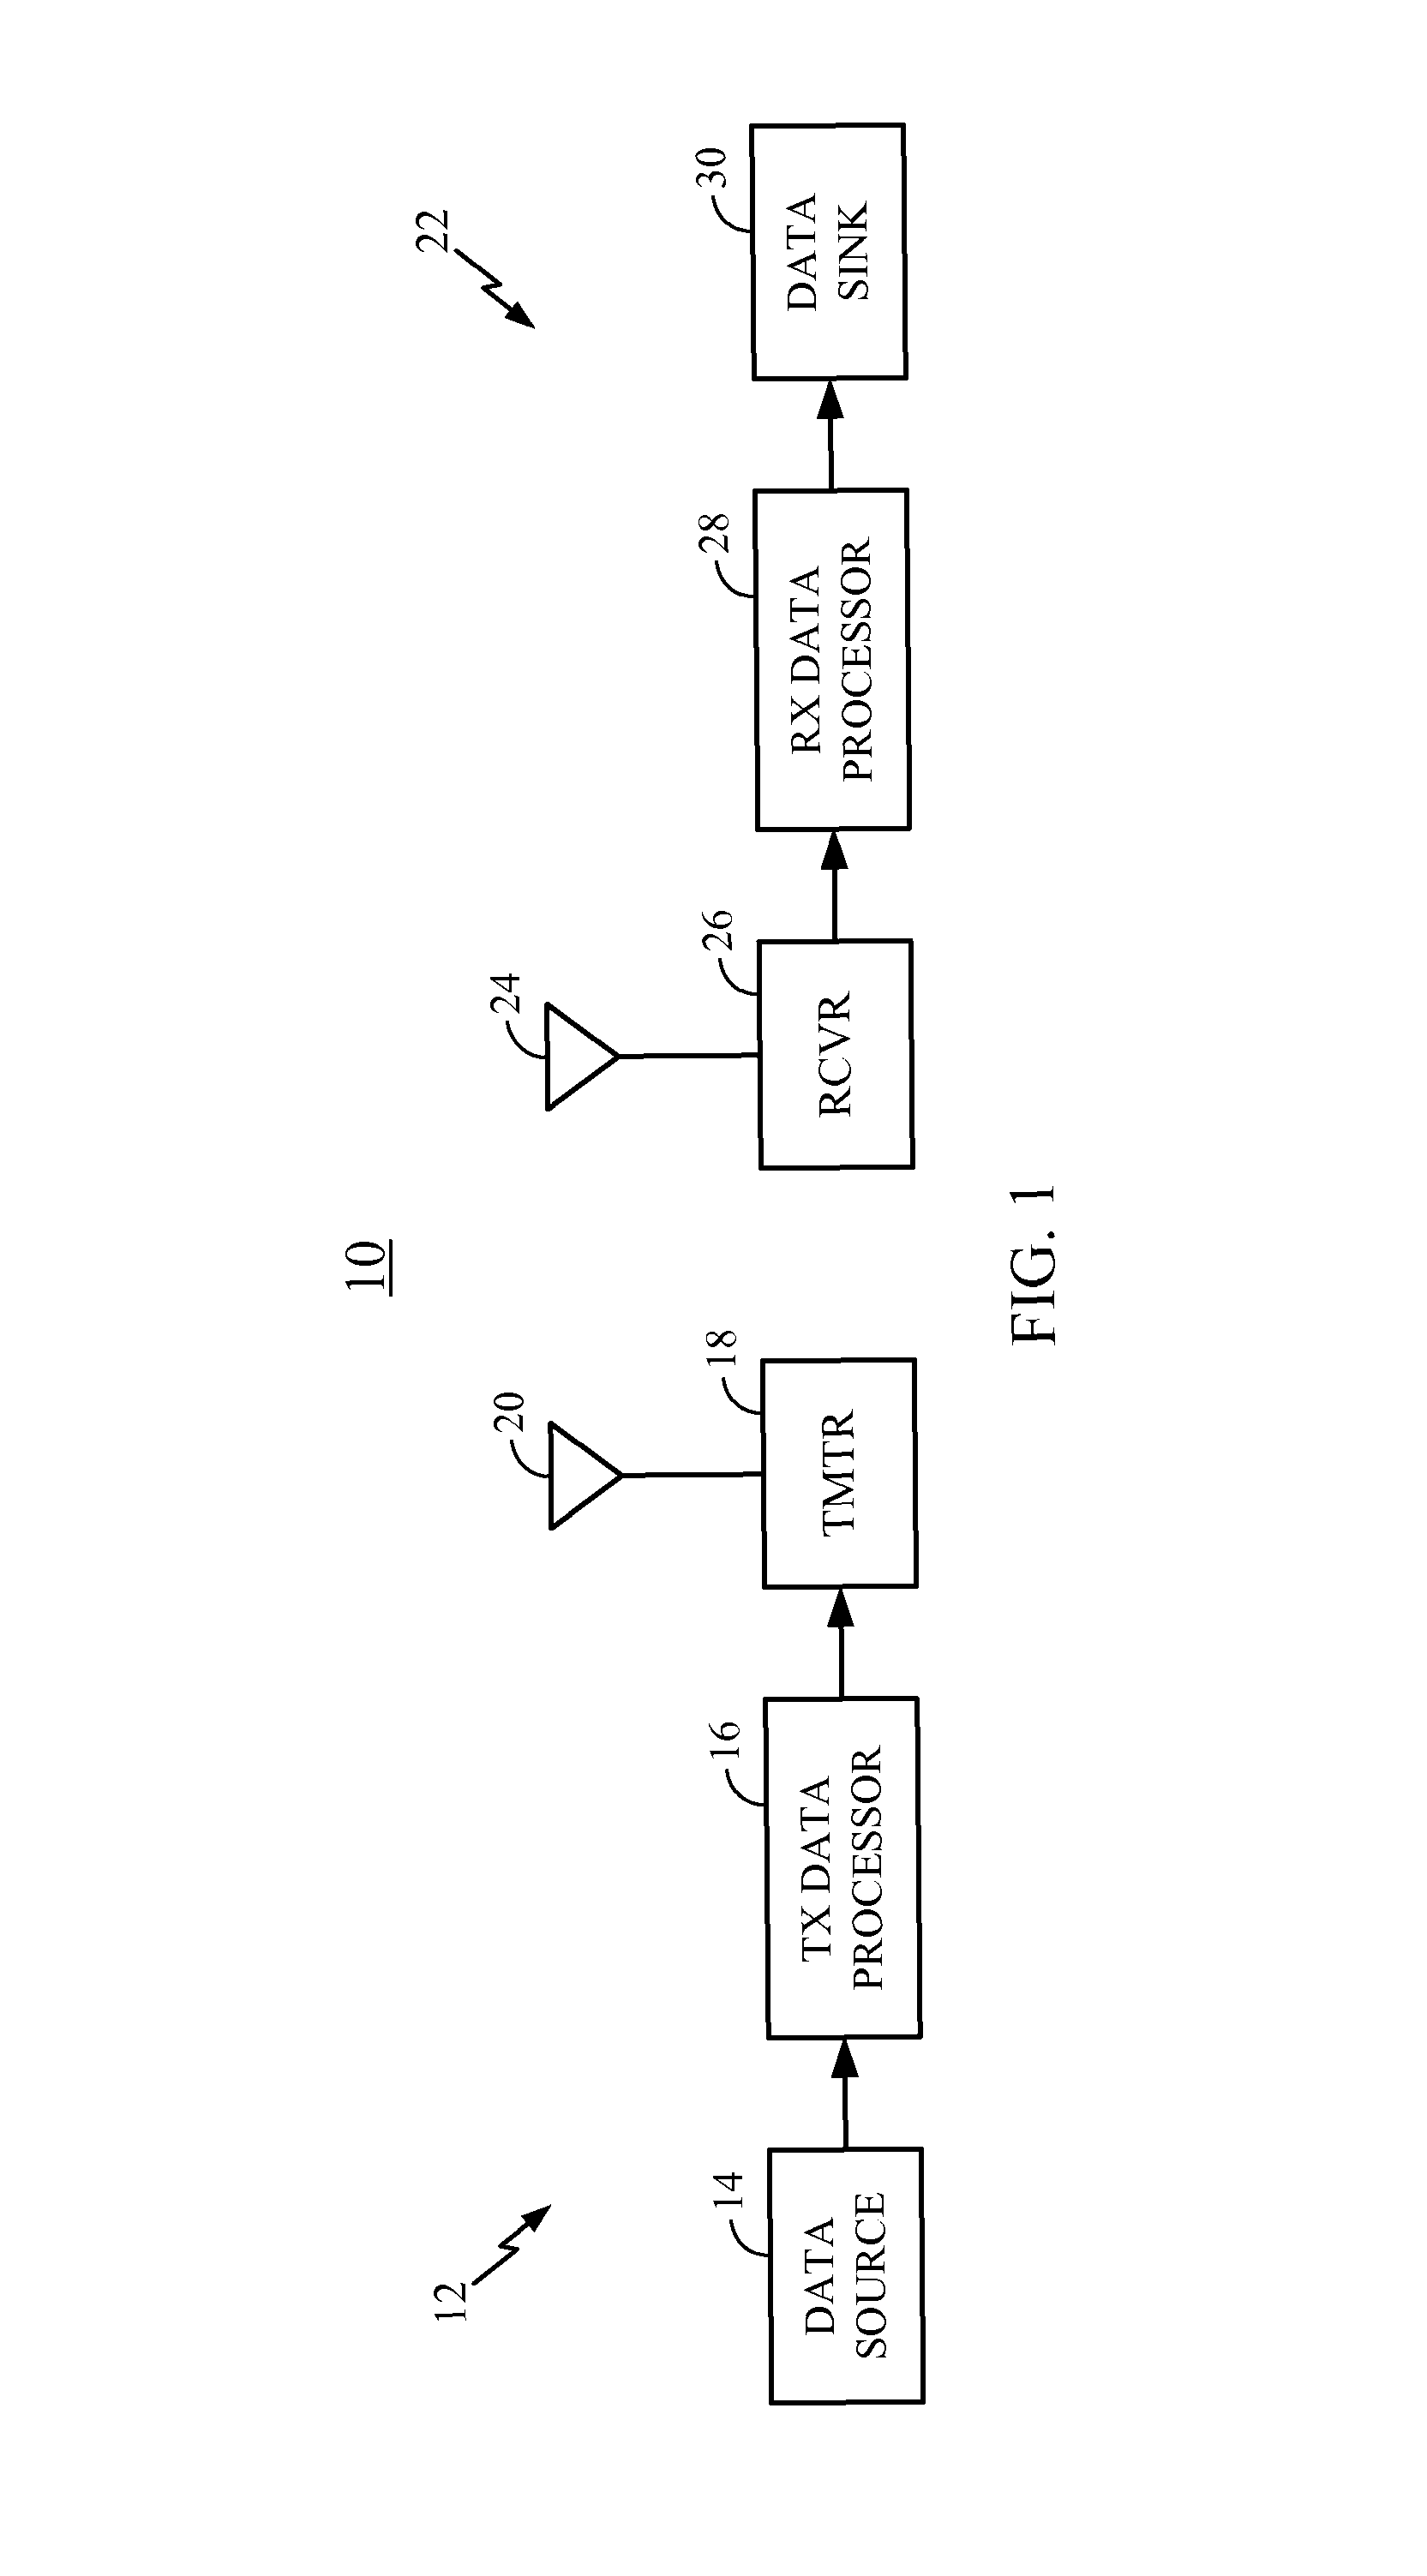 Power-efficient sign extension for booth multiplication methods and systems